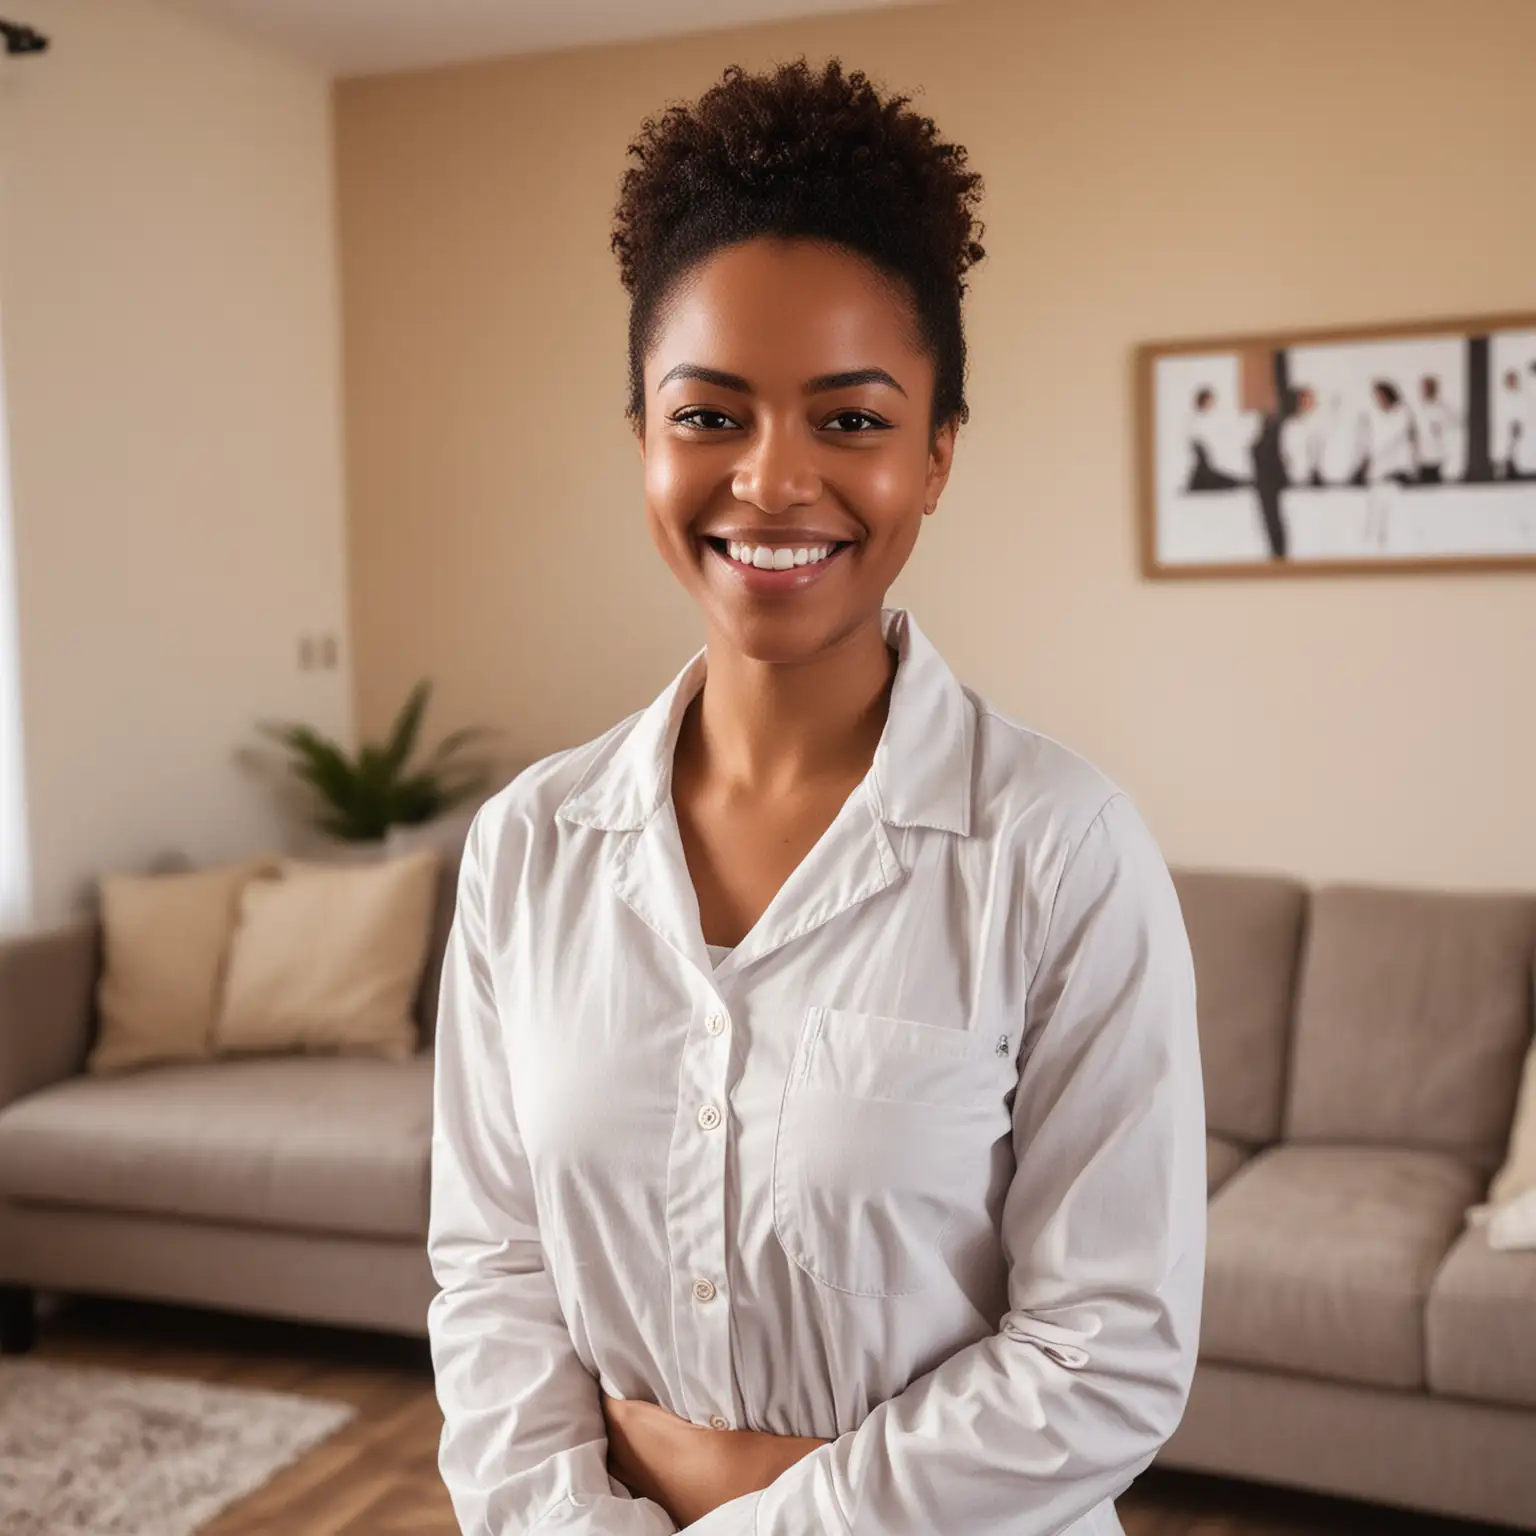 Modern Black Female Midwife Smiling in Colorful Living Room